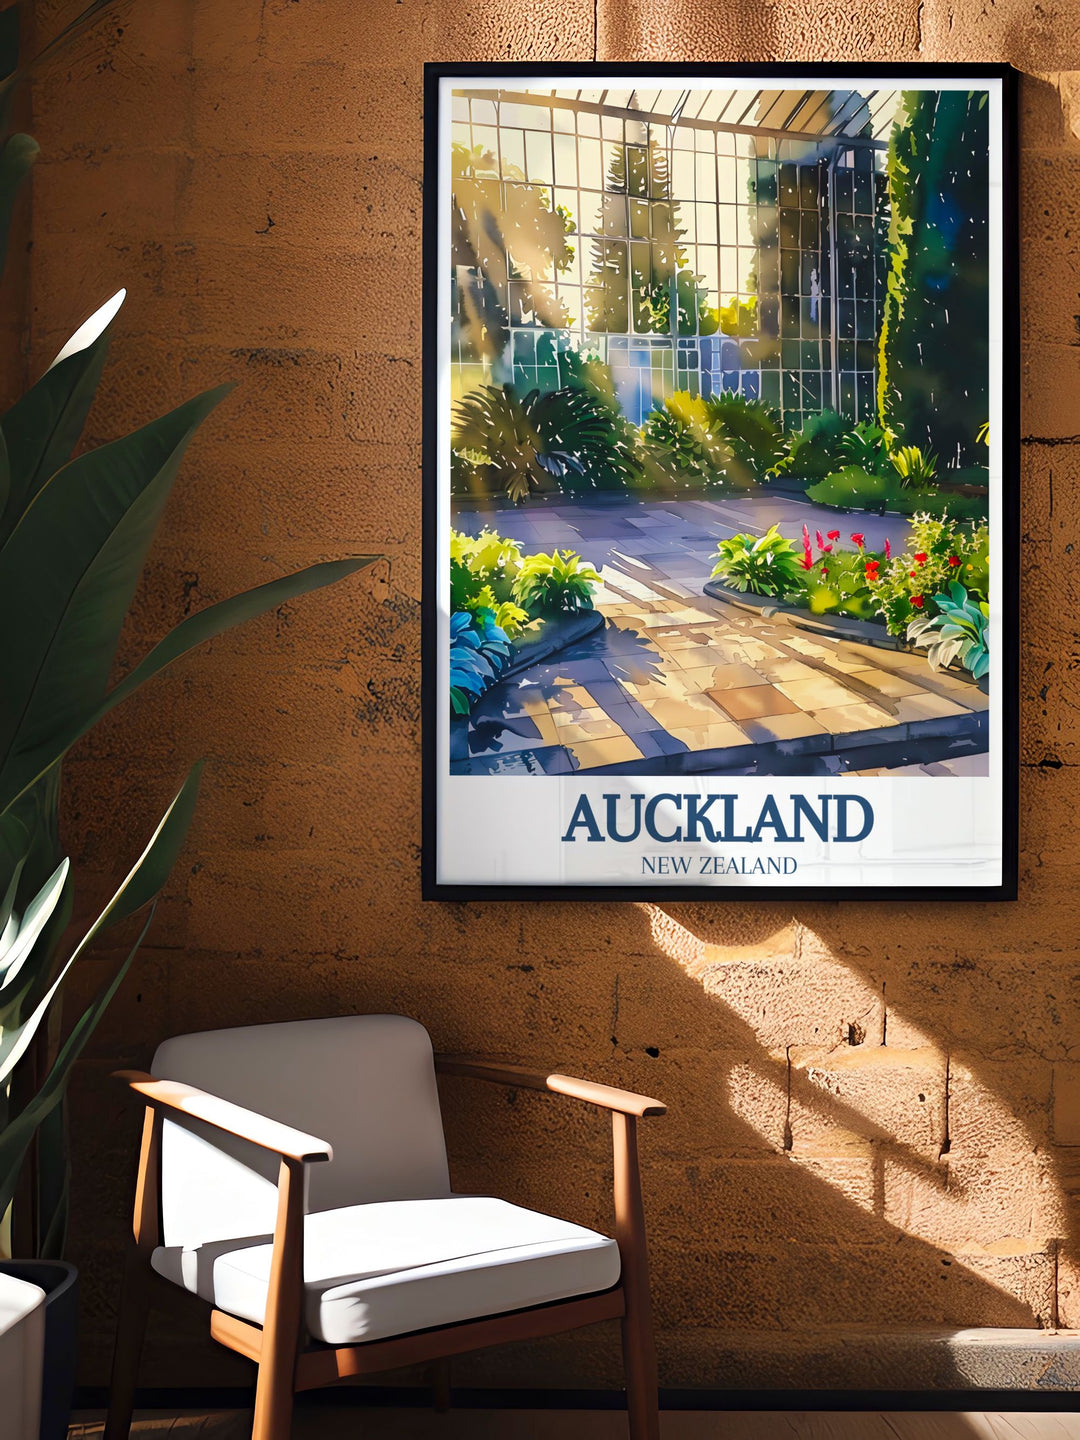 Retro travel poster of Auckland, showcasing the timeless beauty of Auckland Domain, perfect for those who appreciate natural landscapes and New Zealand culture.